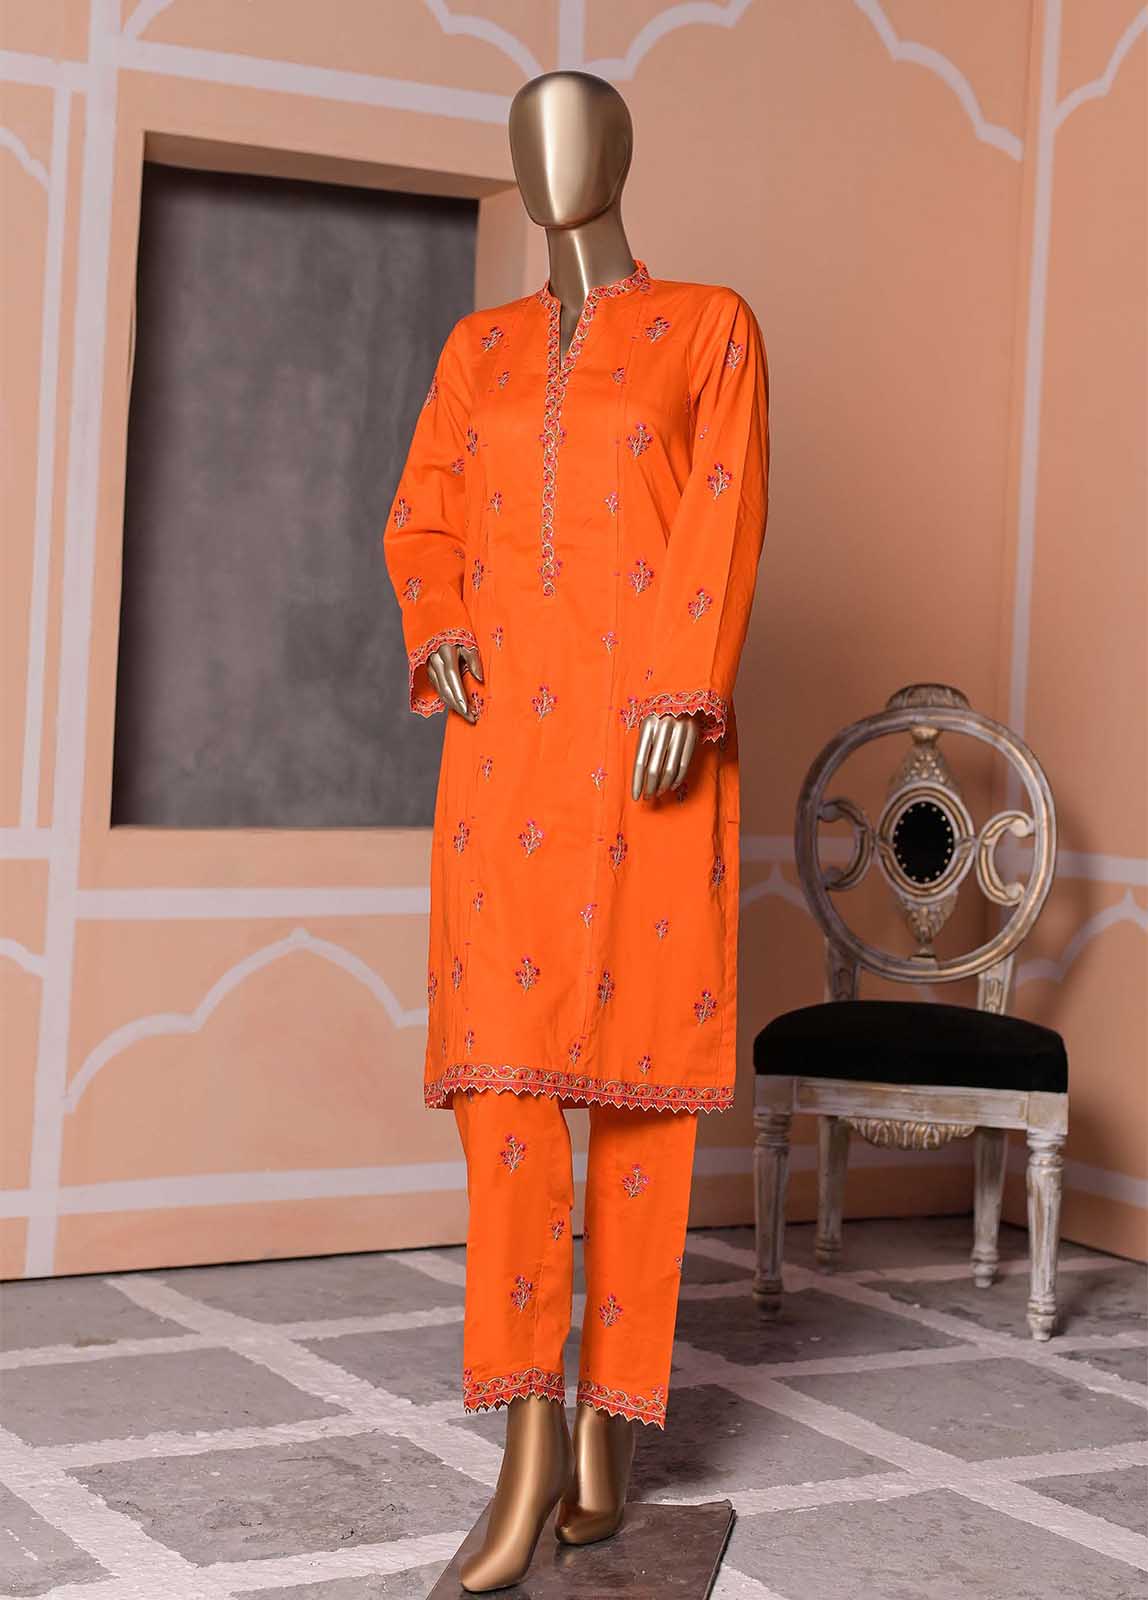 CMFT-011-B - 2 Piece Lawn Embroidered